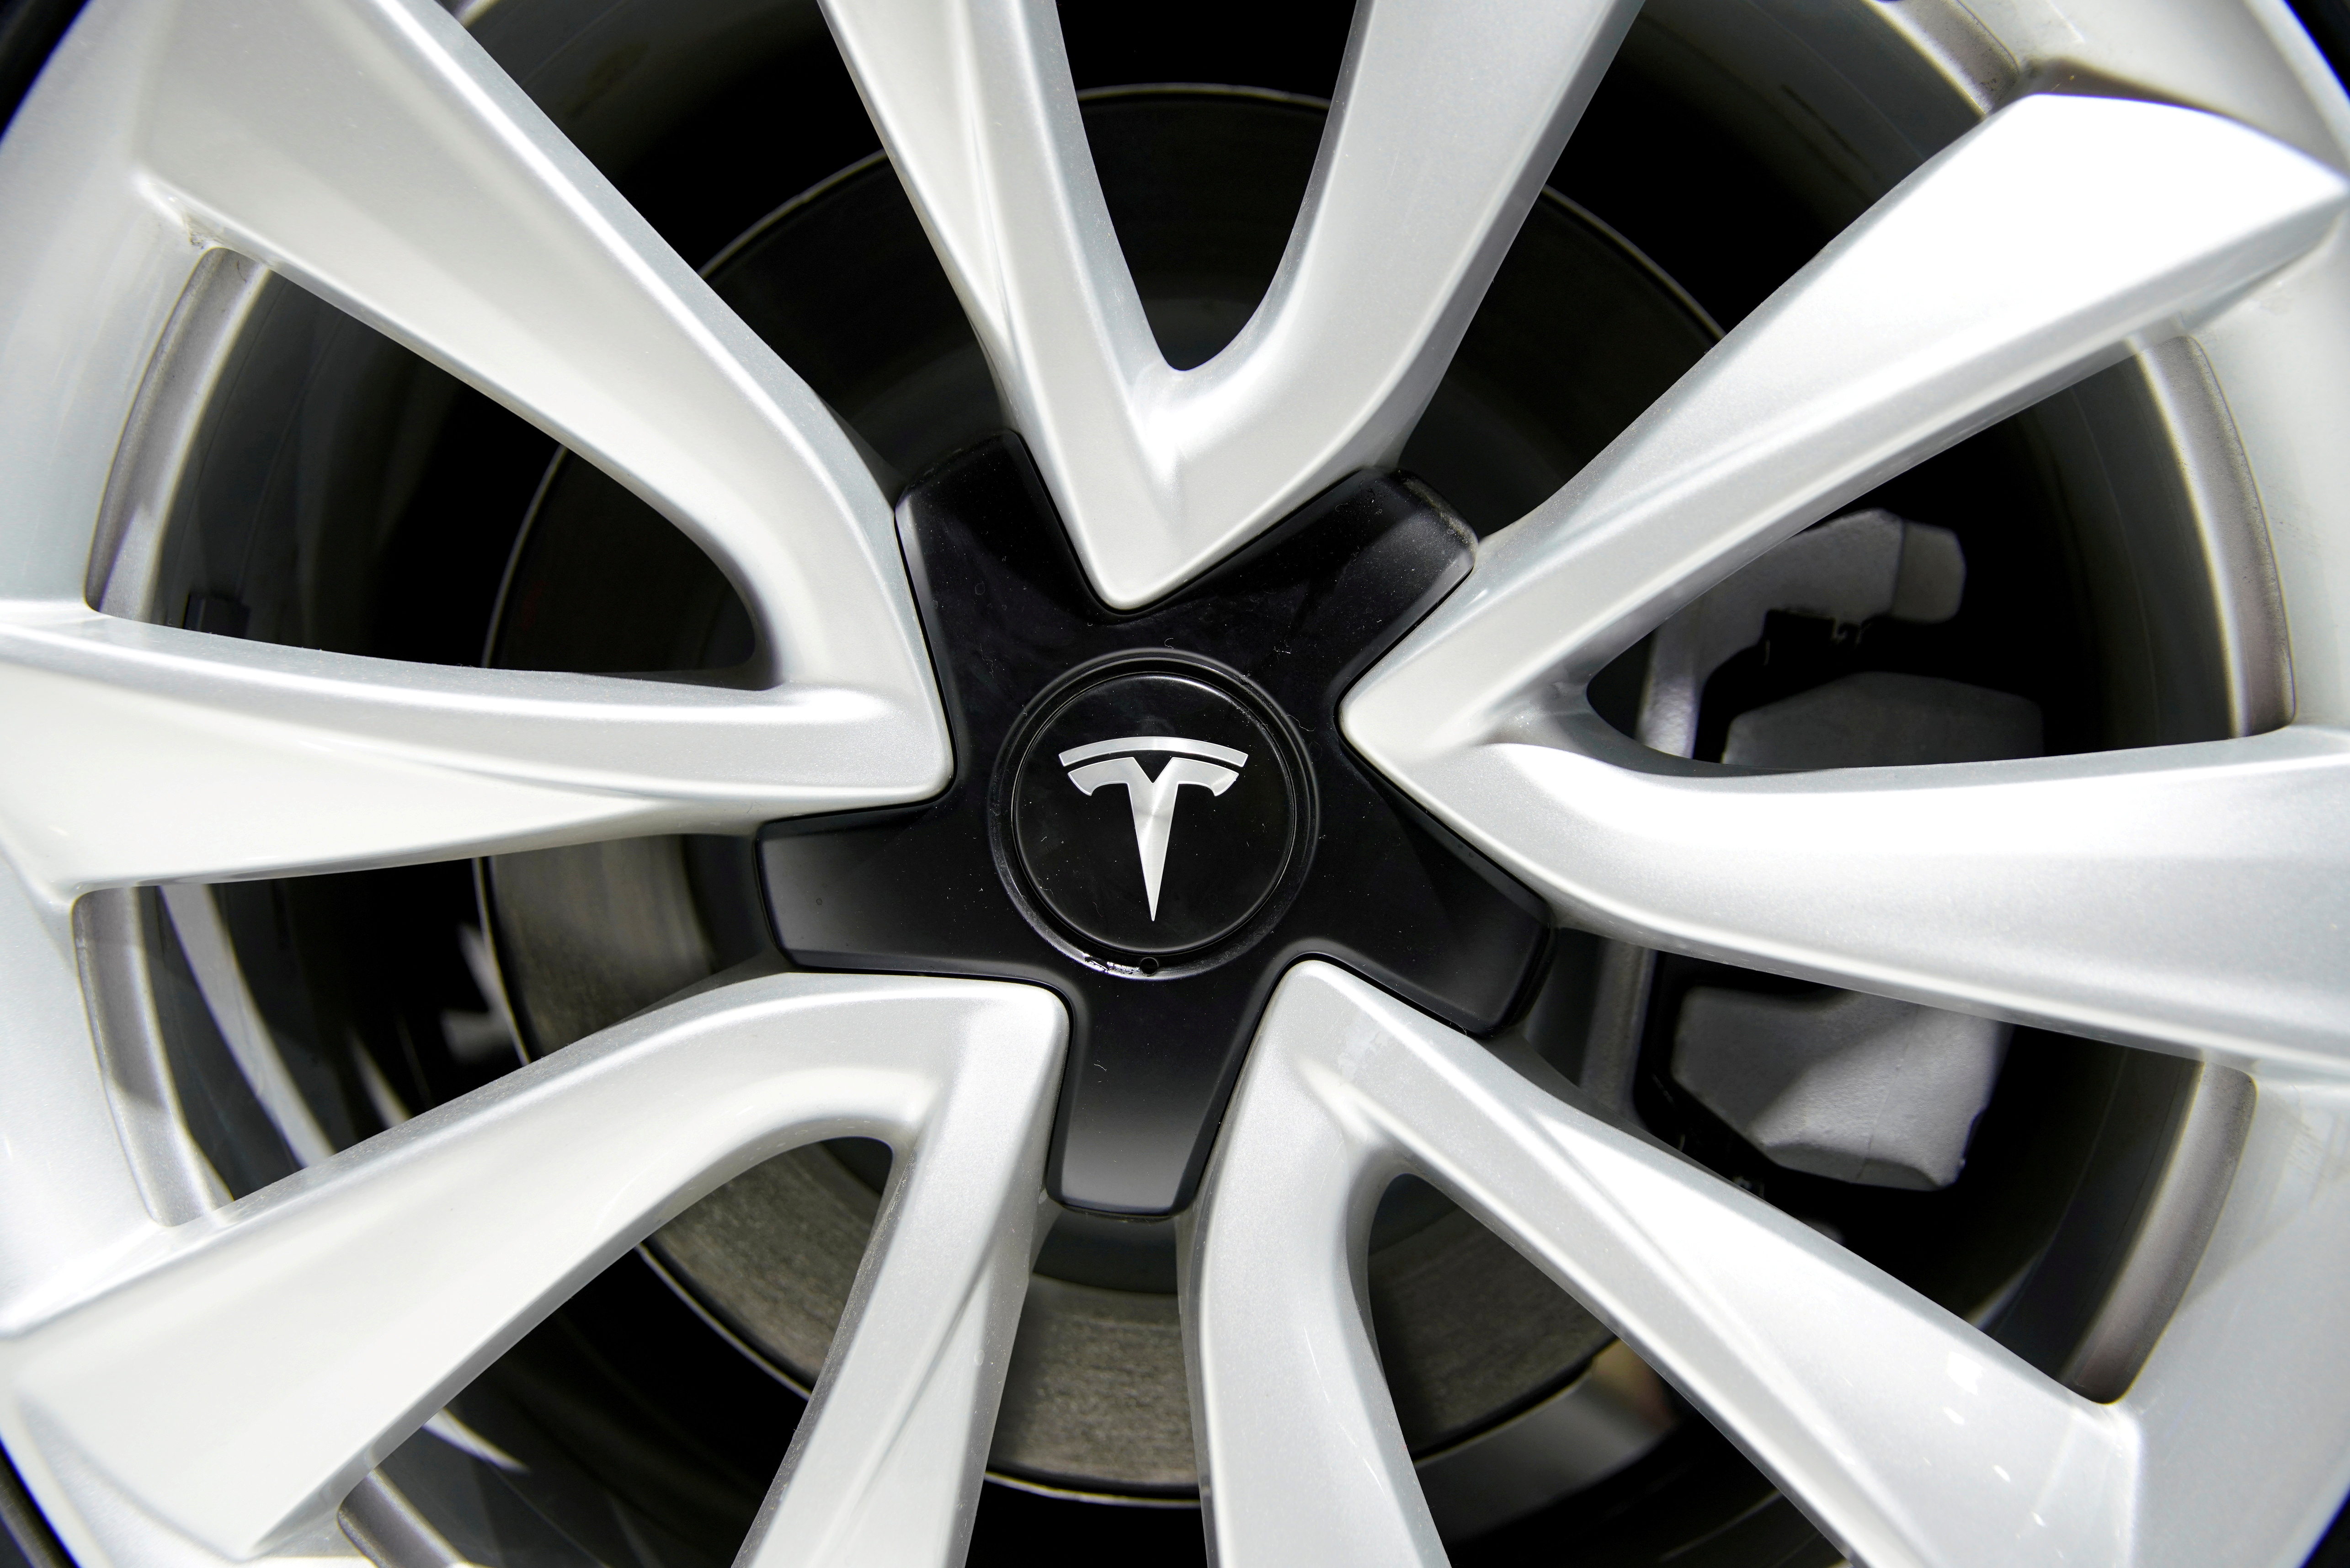 A Tesla logo is seen on a wheel rim during the media day for the Shanghai auto show in Shanghai, China April 16, 2019. REUTERS/Aly Song/File Photo